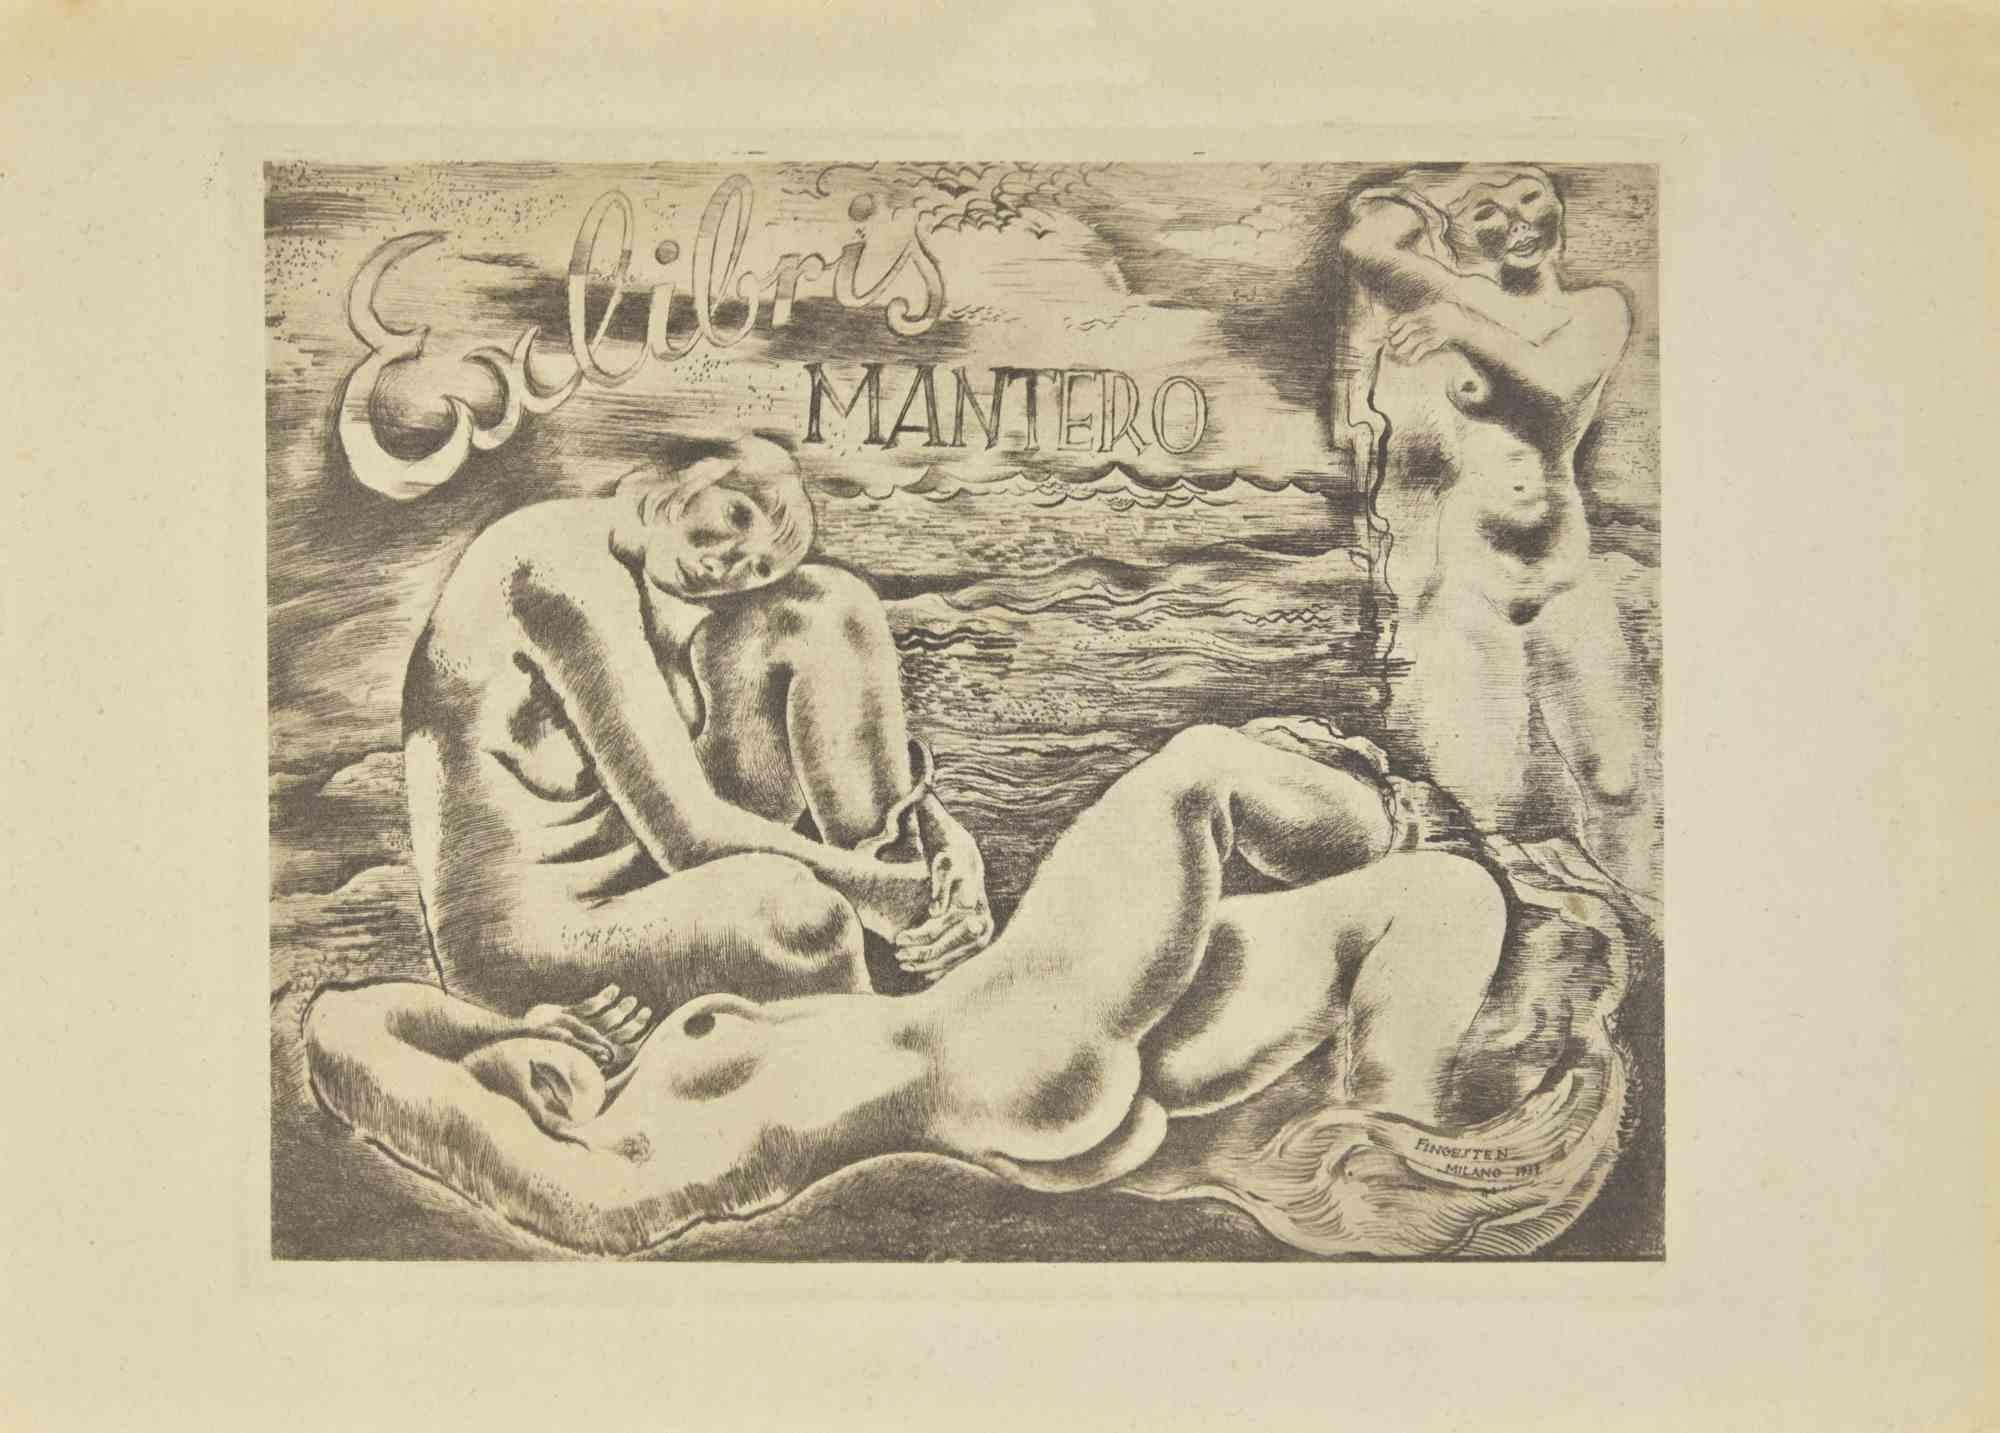 Ex Libris - Mantero is an Etching print created by Michel Fingesten in 1937.
Signed in plate and dated on  the lower right margin.
Good conditions except some foxings that doesn't affect the image.

Michel Fingesten (1884 - 1943) was a Czech painter